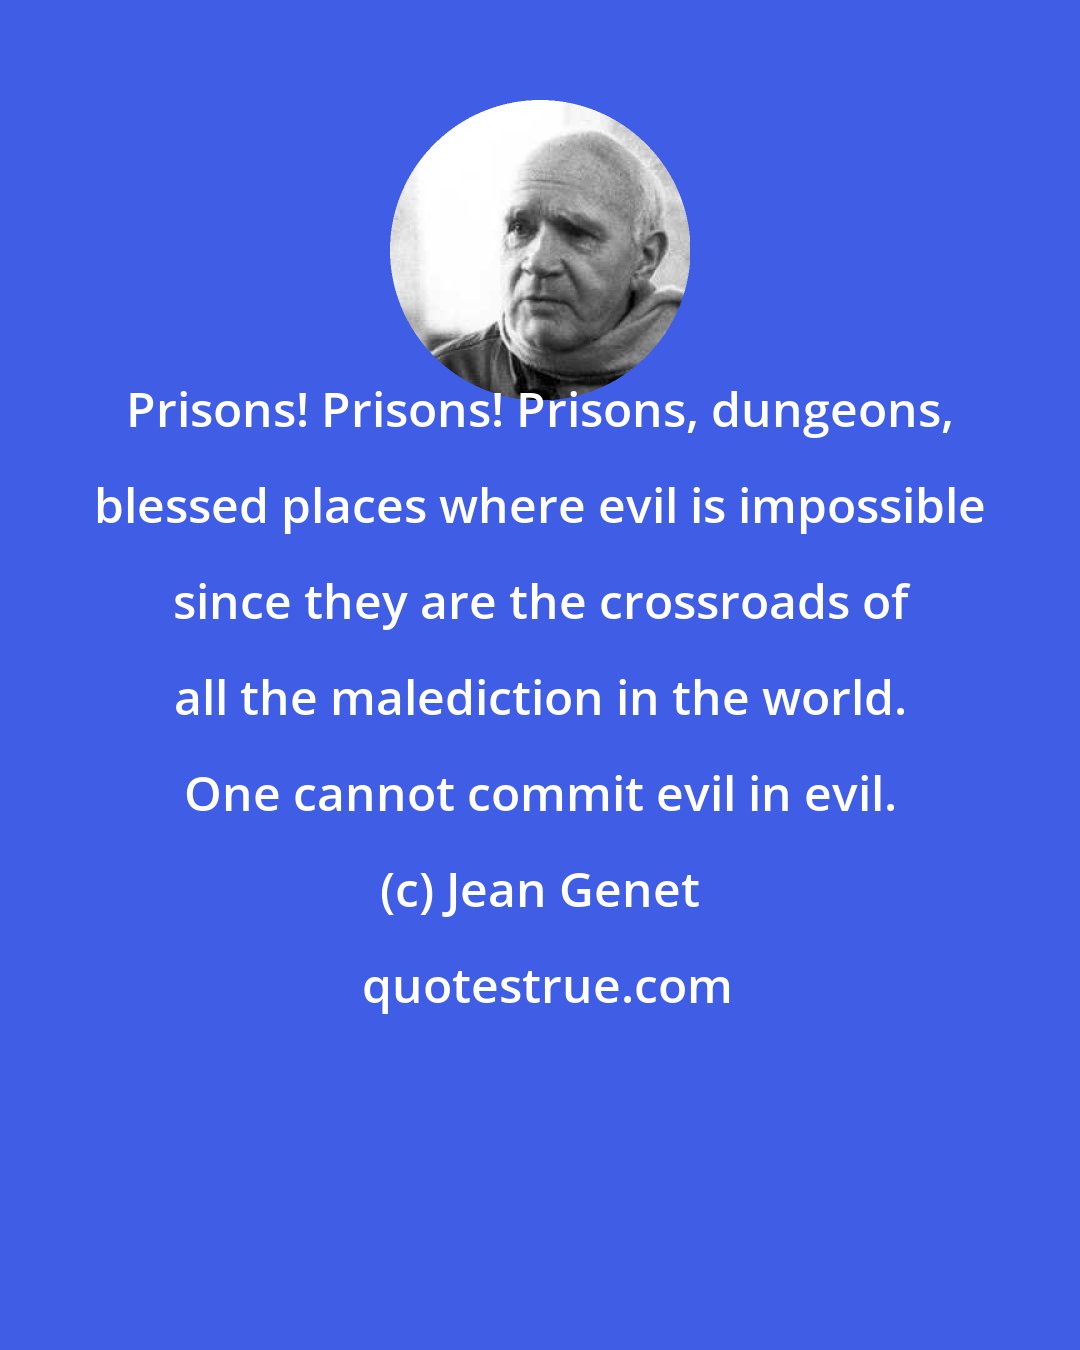 Jean Genet: Prisons! Prisons! Prisons, dungeons, blessed places where evil is impossible since they are the crossroads of all the malediction in the world. One cannot commit evil in evil.